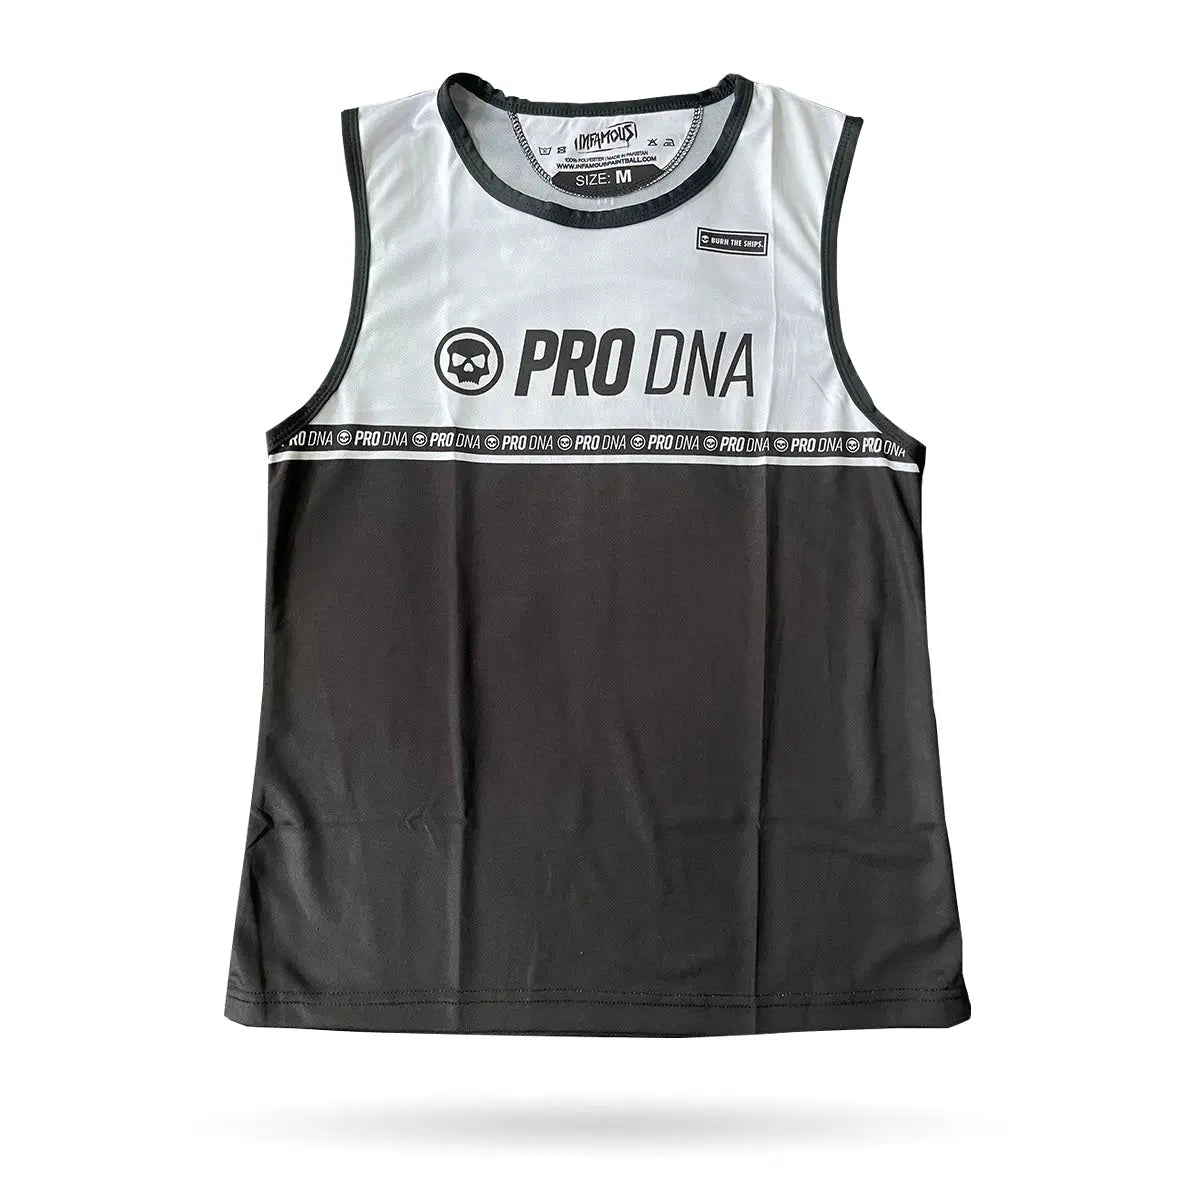 DRY-FIT TANK TOP - PRO DNA